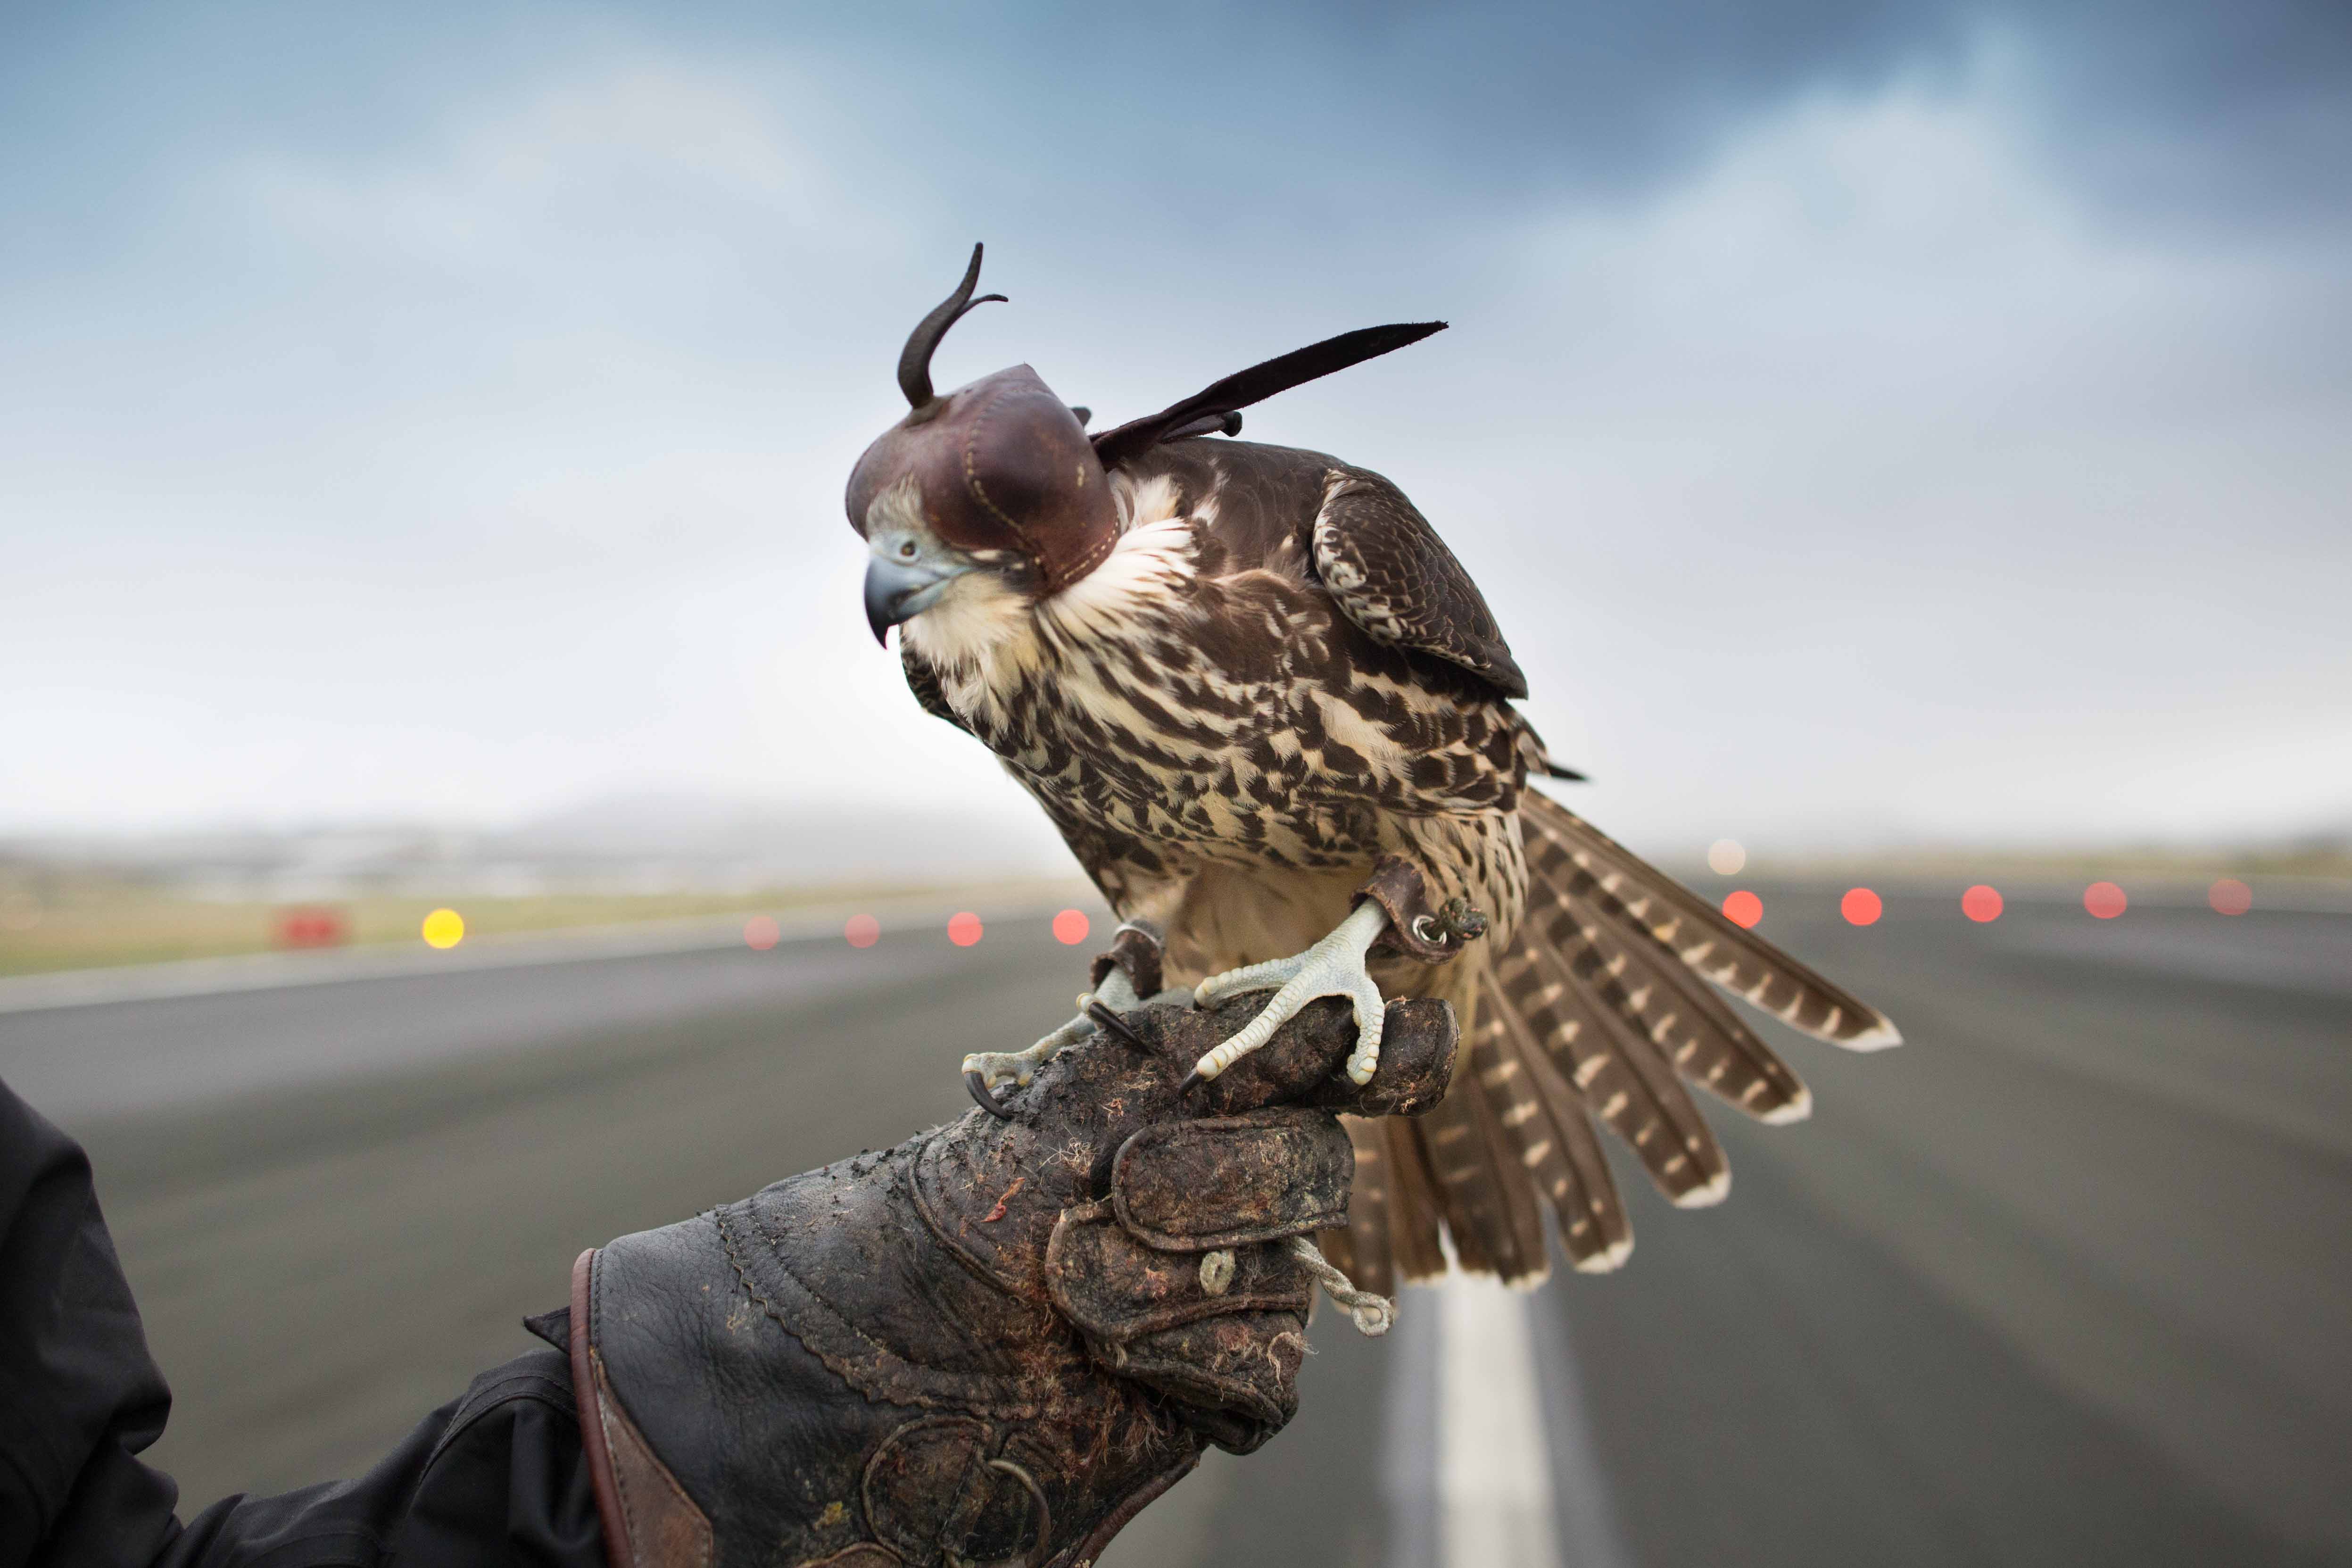 Until a few seconds before the flight, the view of the falcon is cancelled to keep the animal calm.